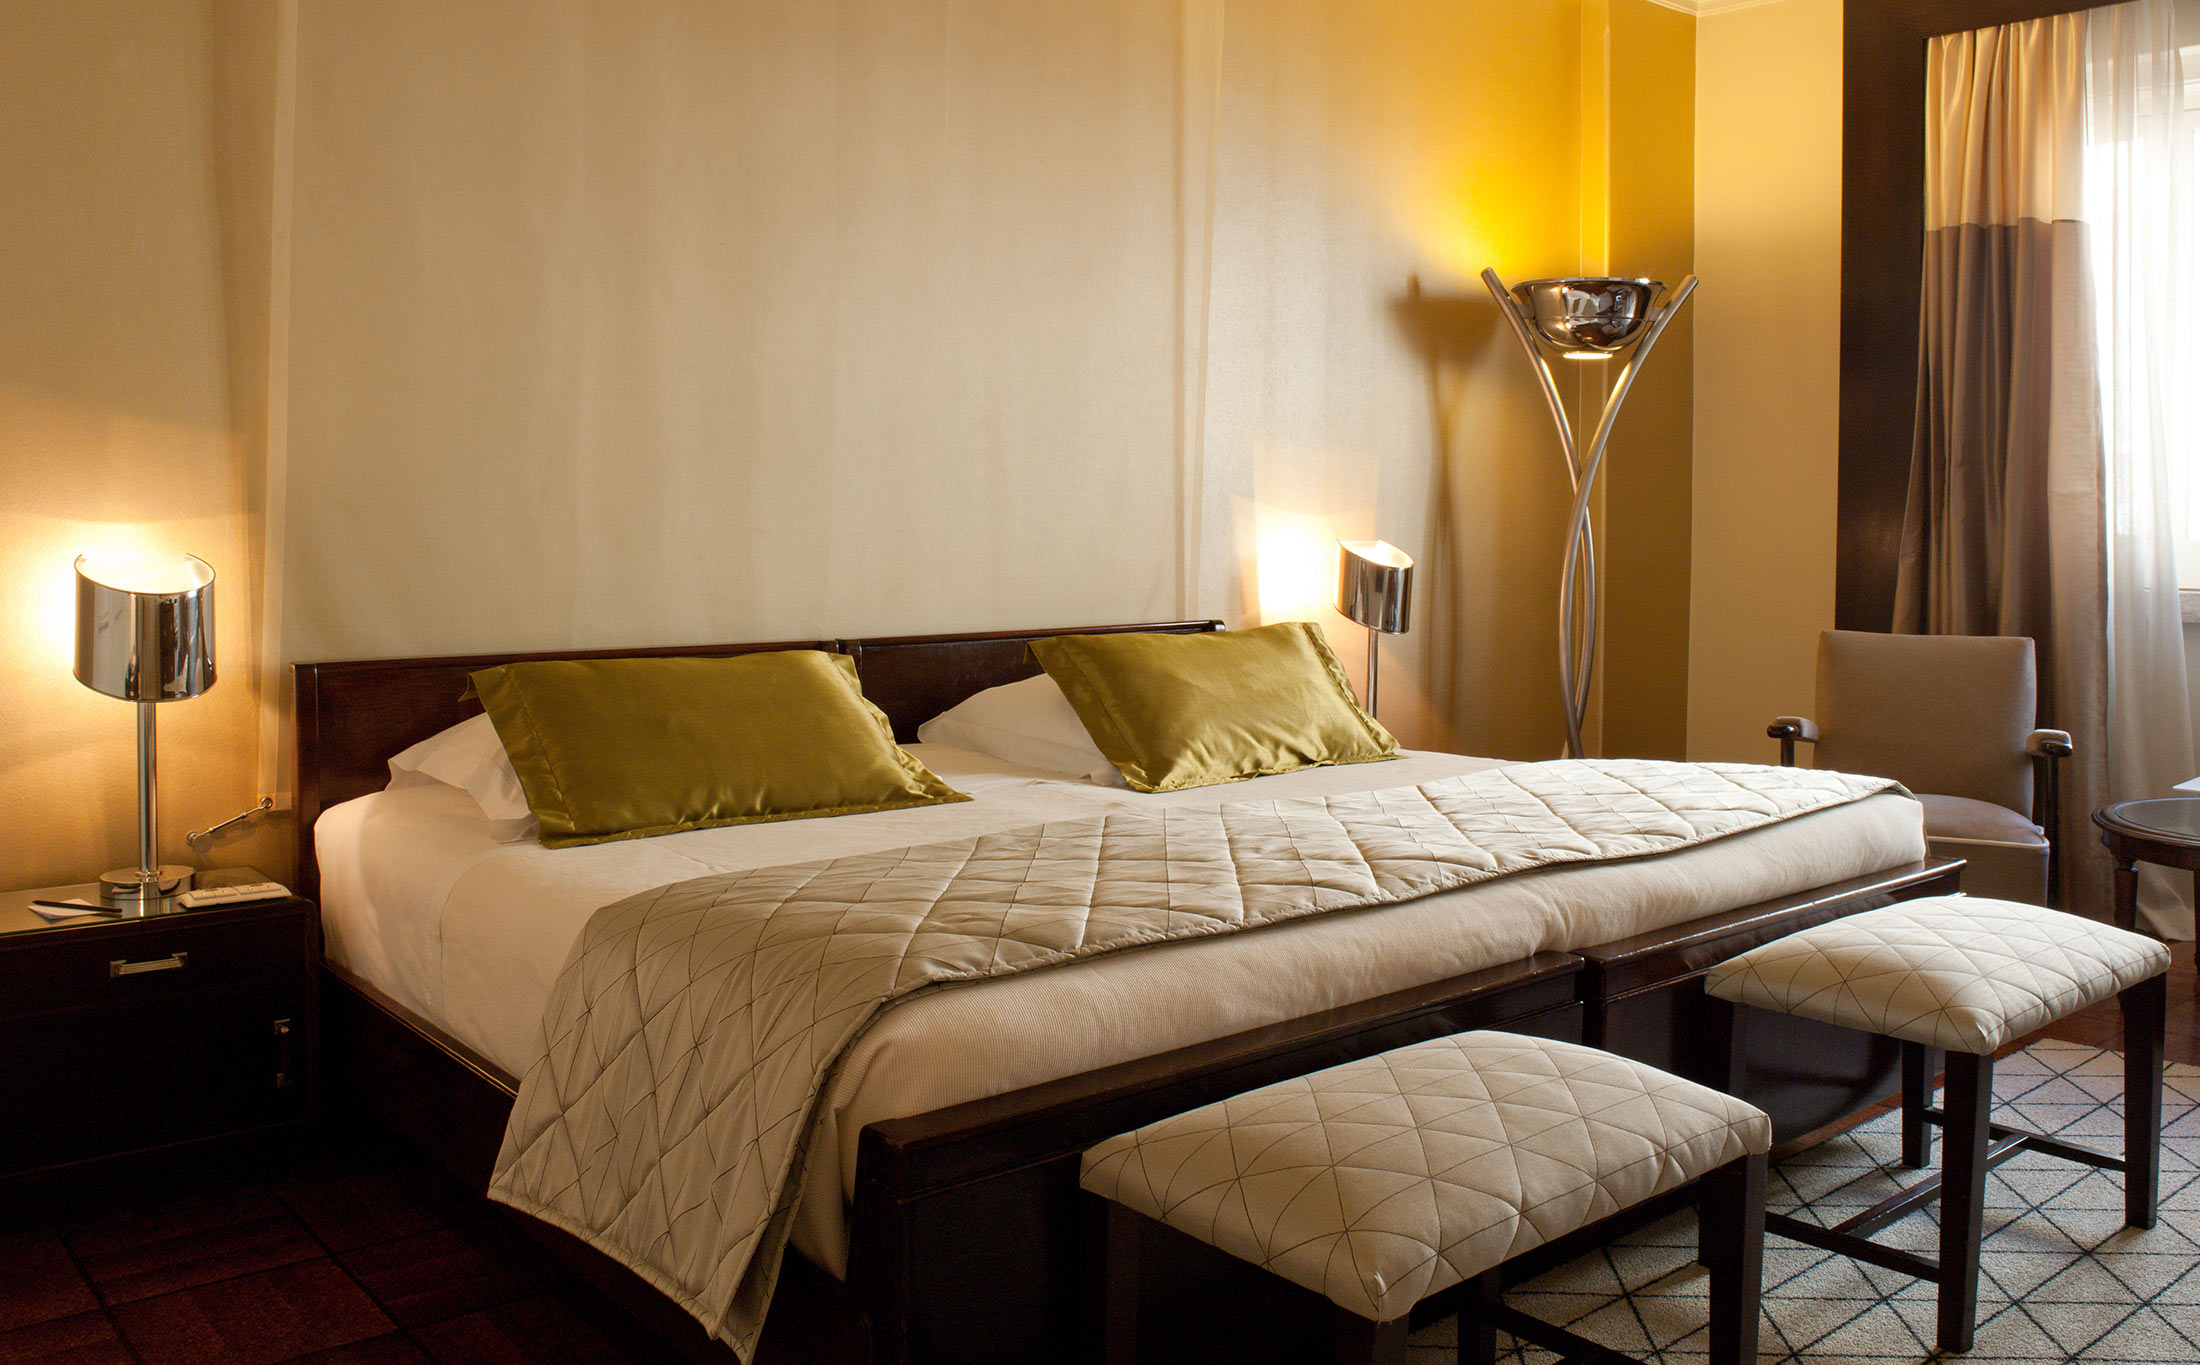 Last Minute Offer - 20% off your stay on any Lisbon Heritage Hotel